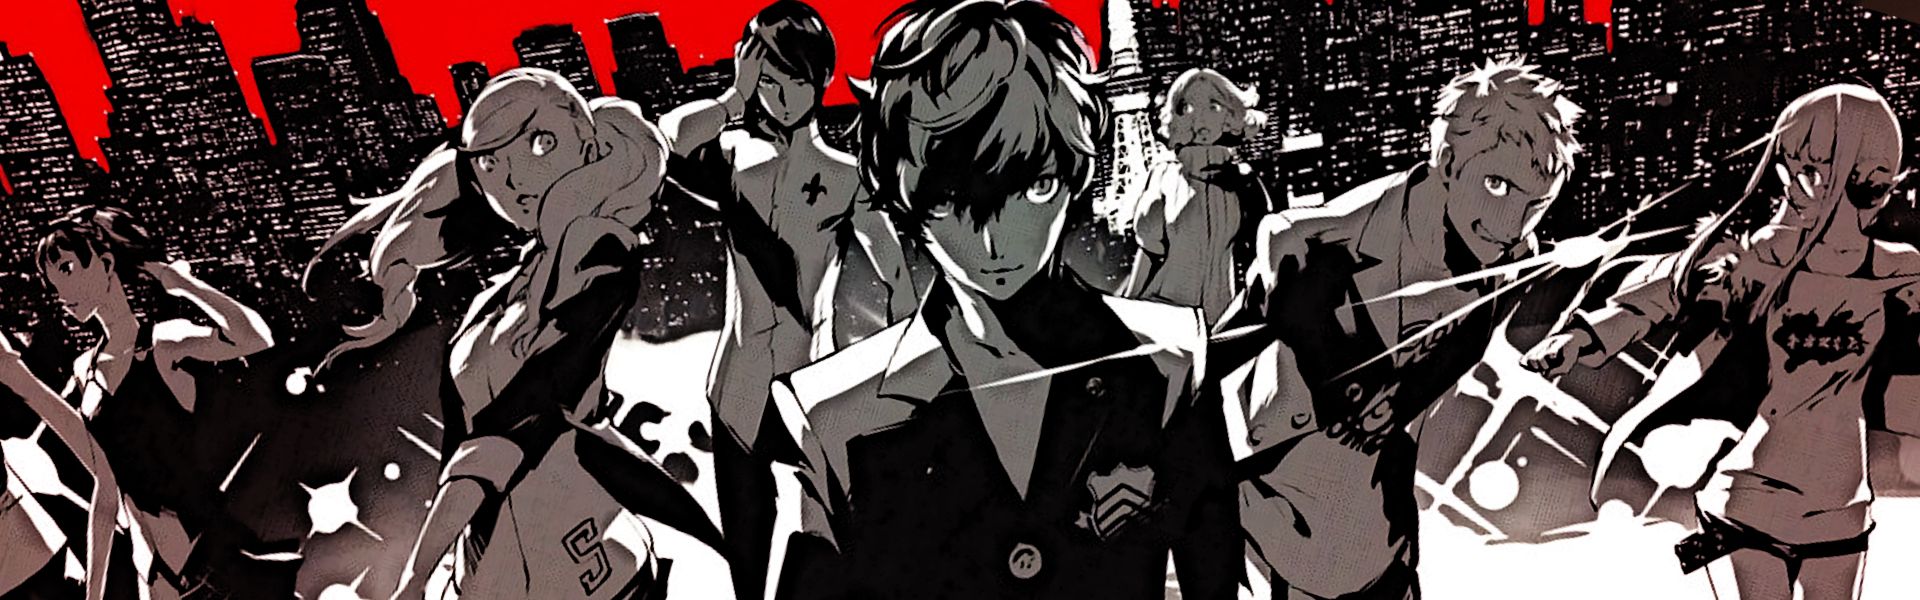 New Persona Details On Anime, Dancing Spin Offs, PS4 Port & More!